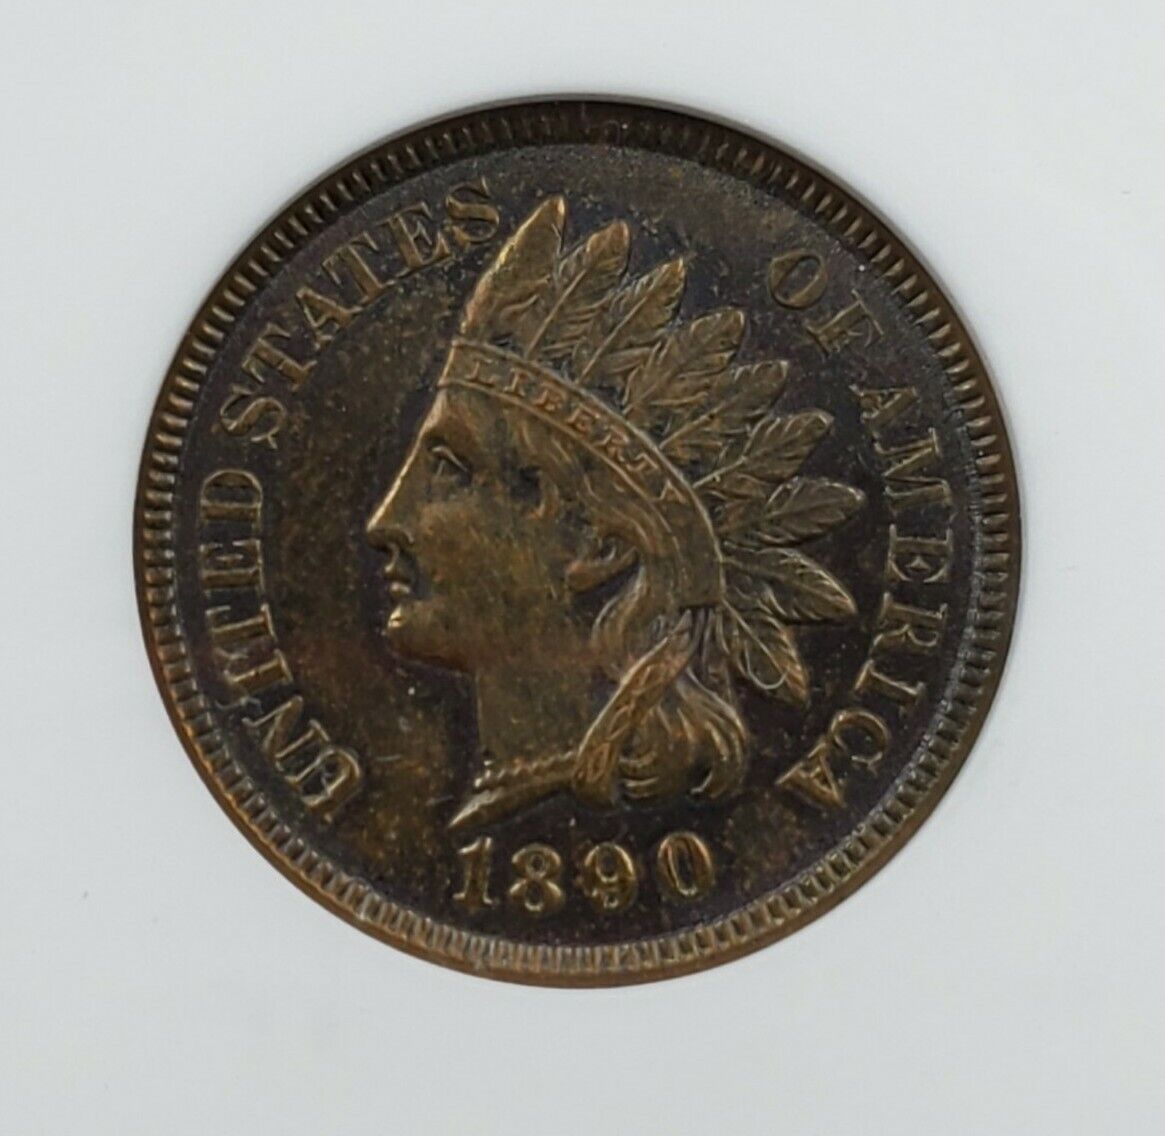 1890 Indian Cent Penny Variety Error Coin ANACS MS62 BN FS-010.84 FS-401 S-4